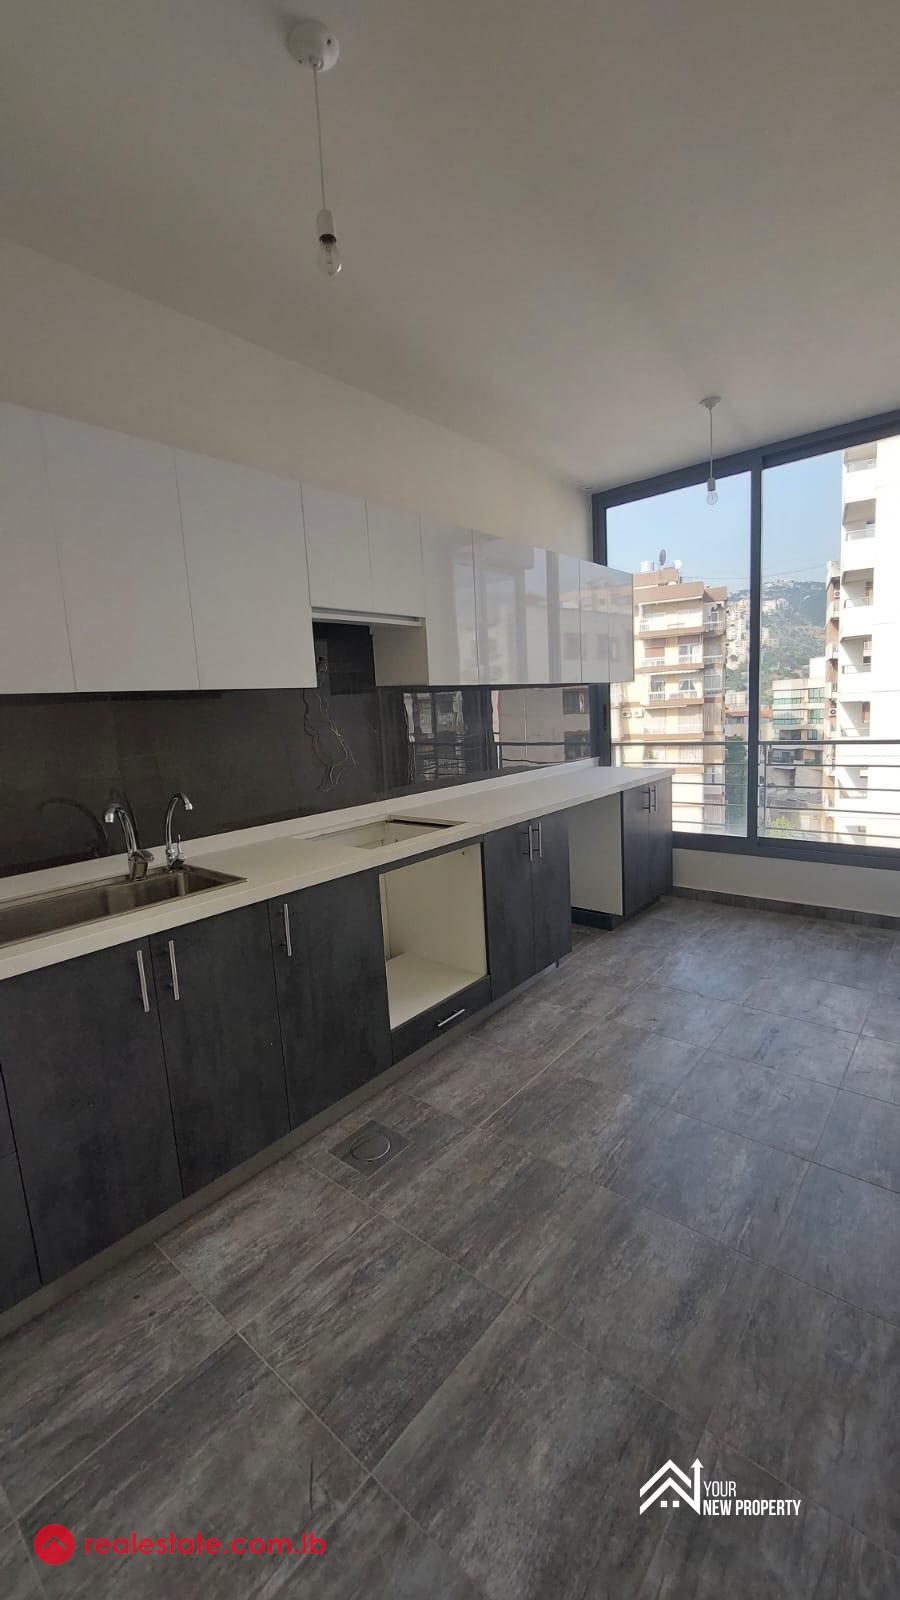 New apartment for sale, suitable for AIRBNB with big terrace and panoramic view